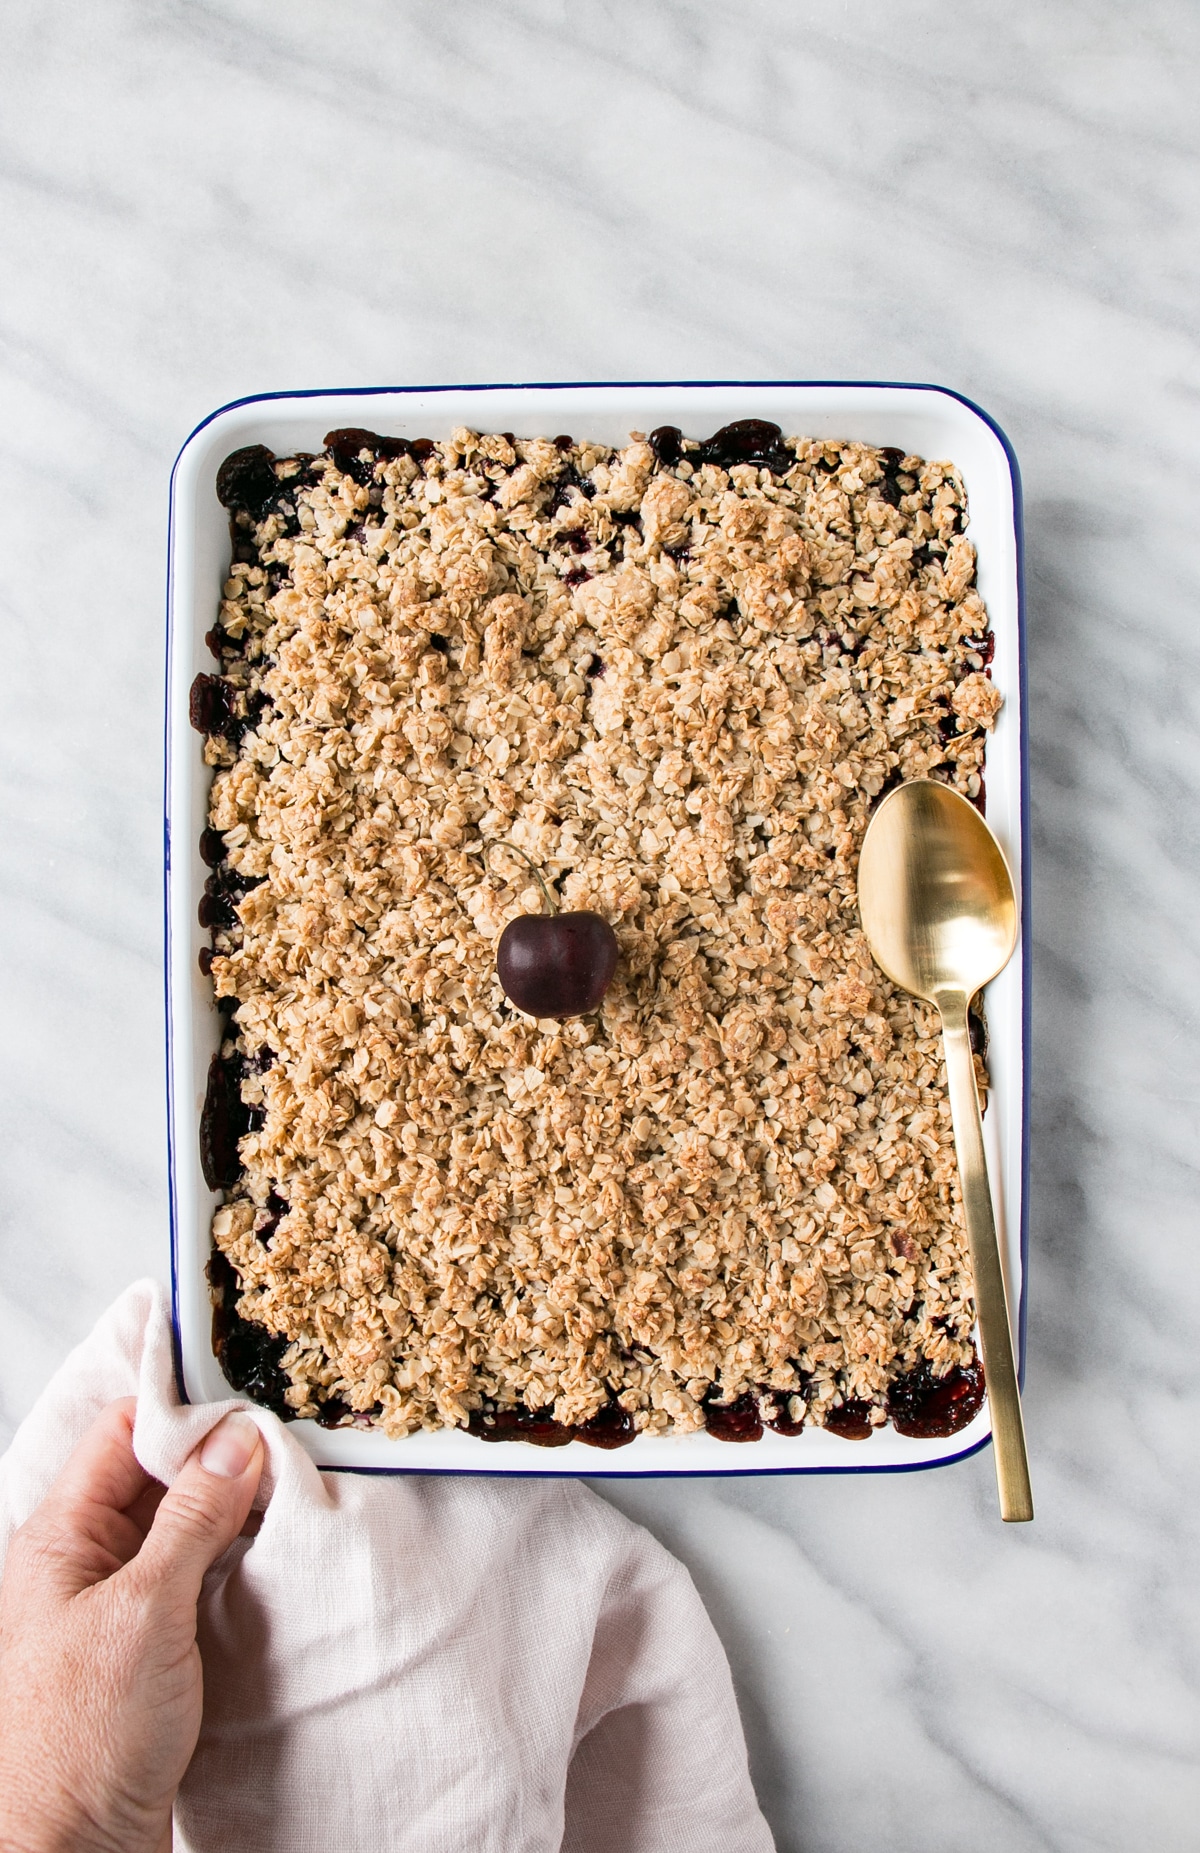 Cherry Crumble in a serving tray.